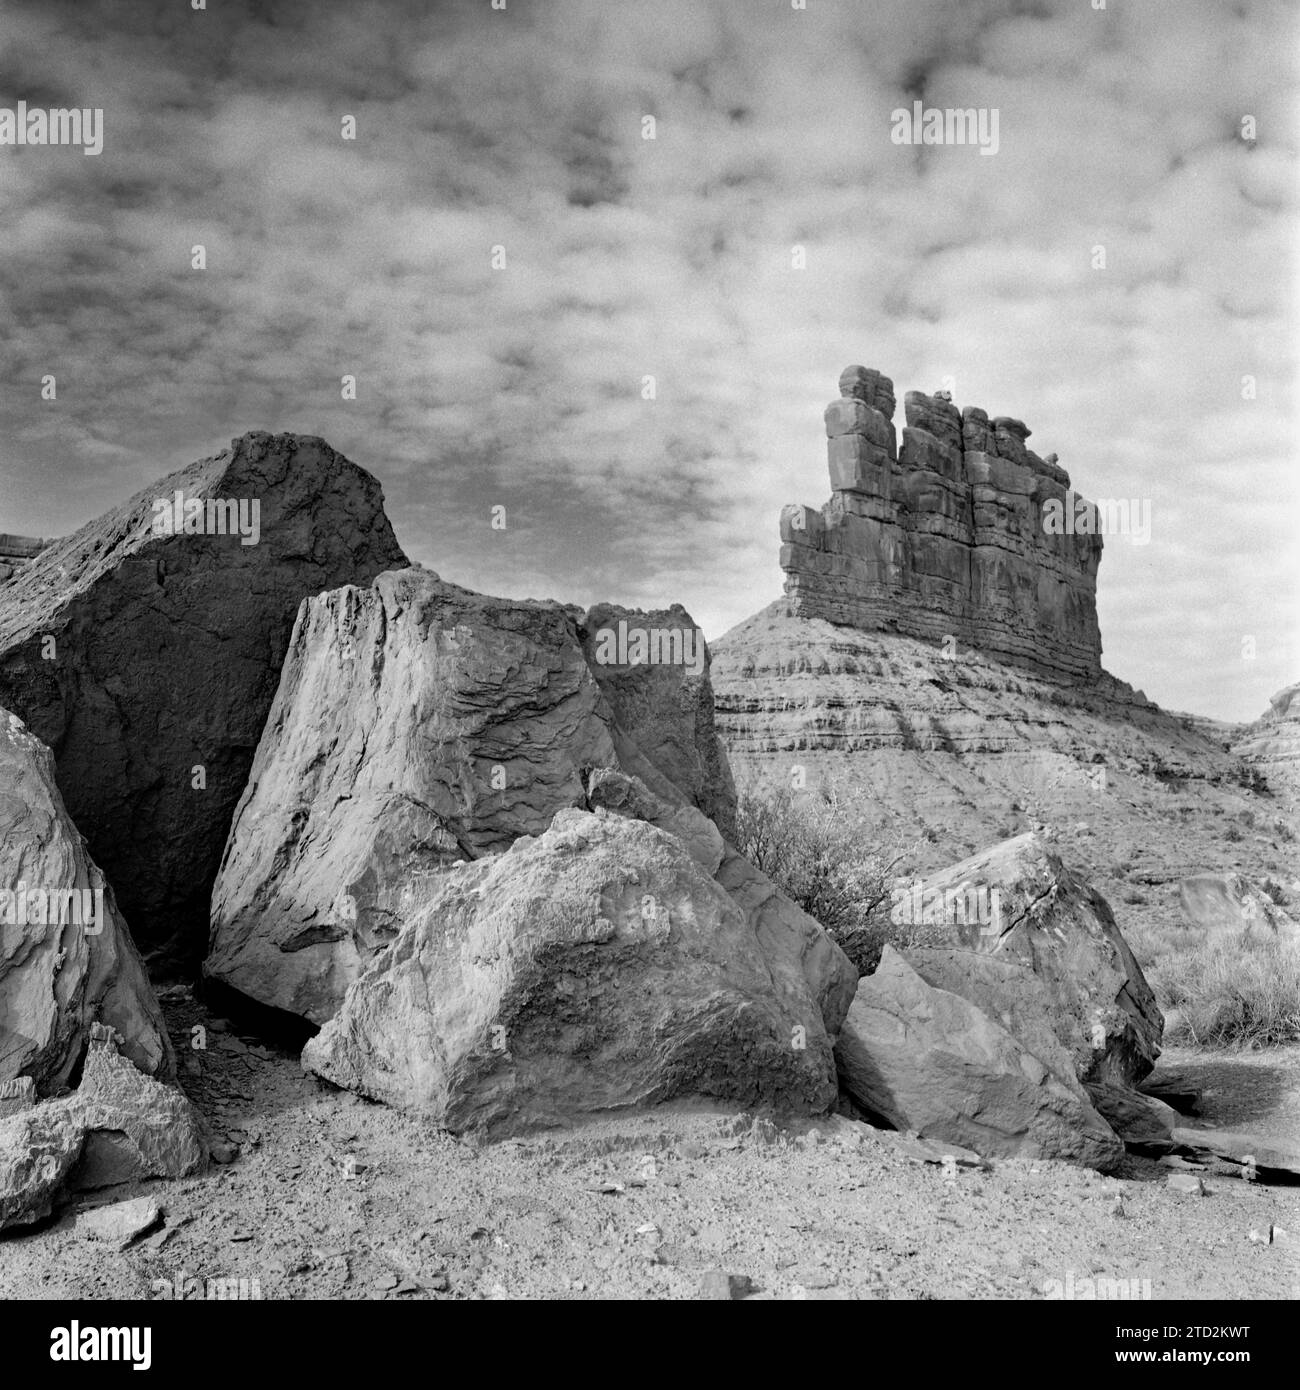 HB44103-00....UTAH - Boulders and sandstone butte in Valley Of The Gods. Stock Photo